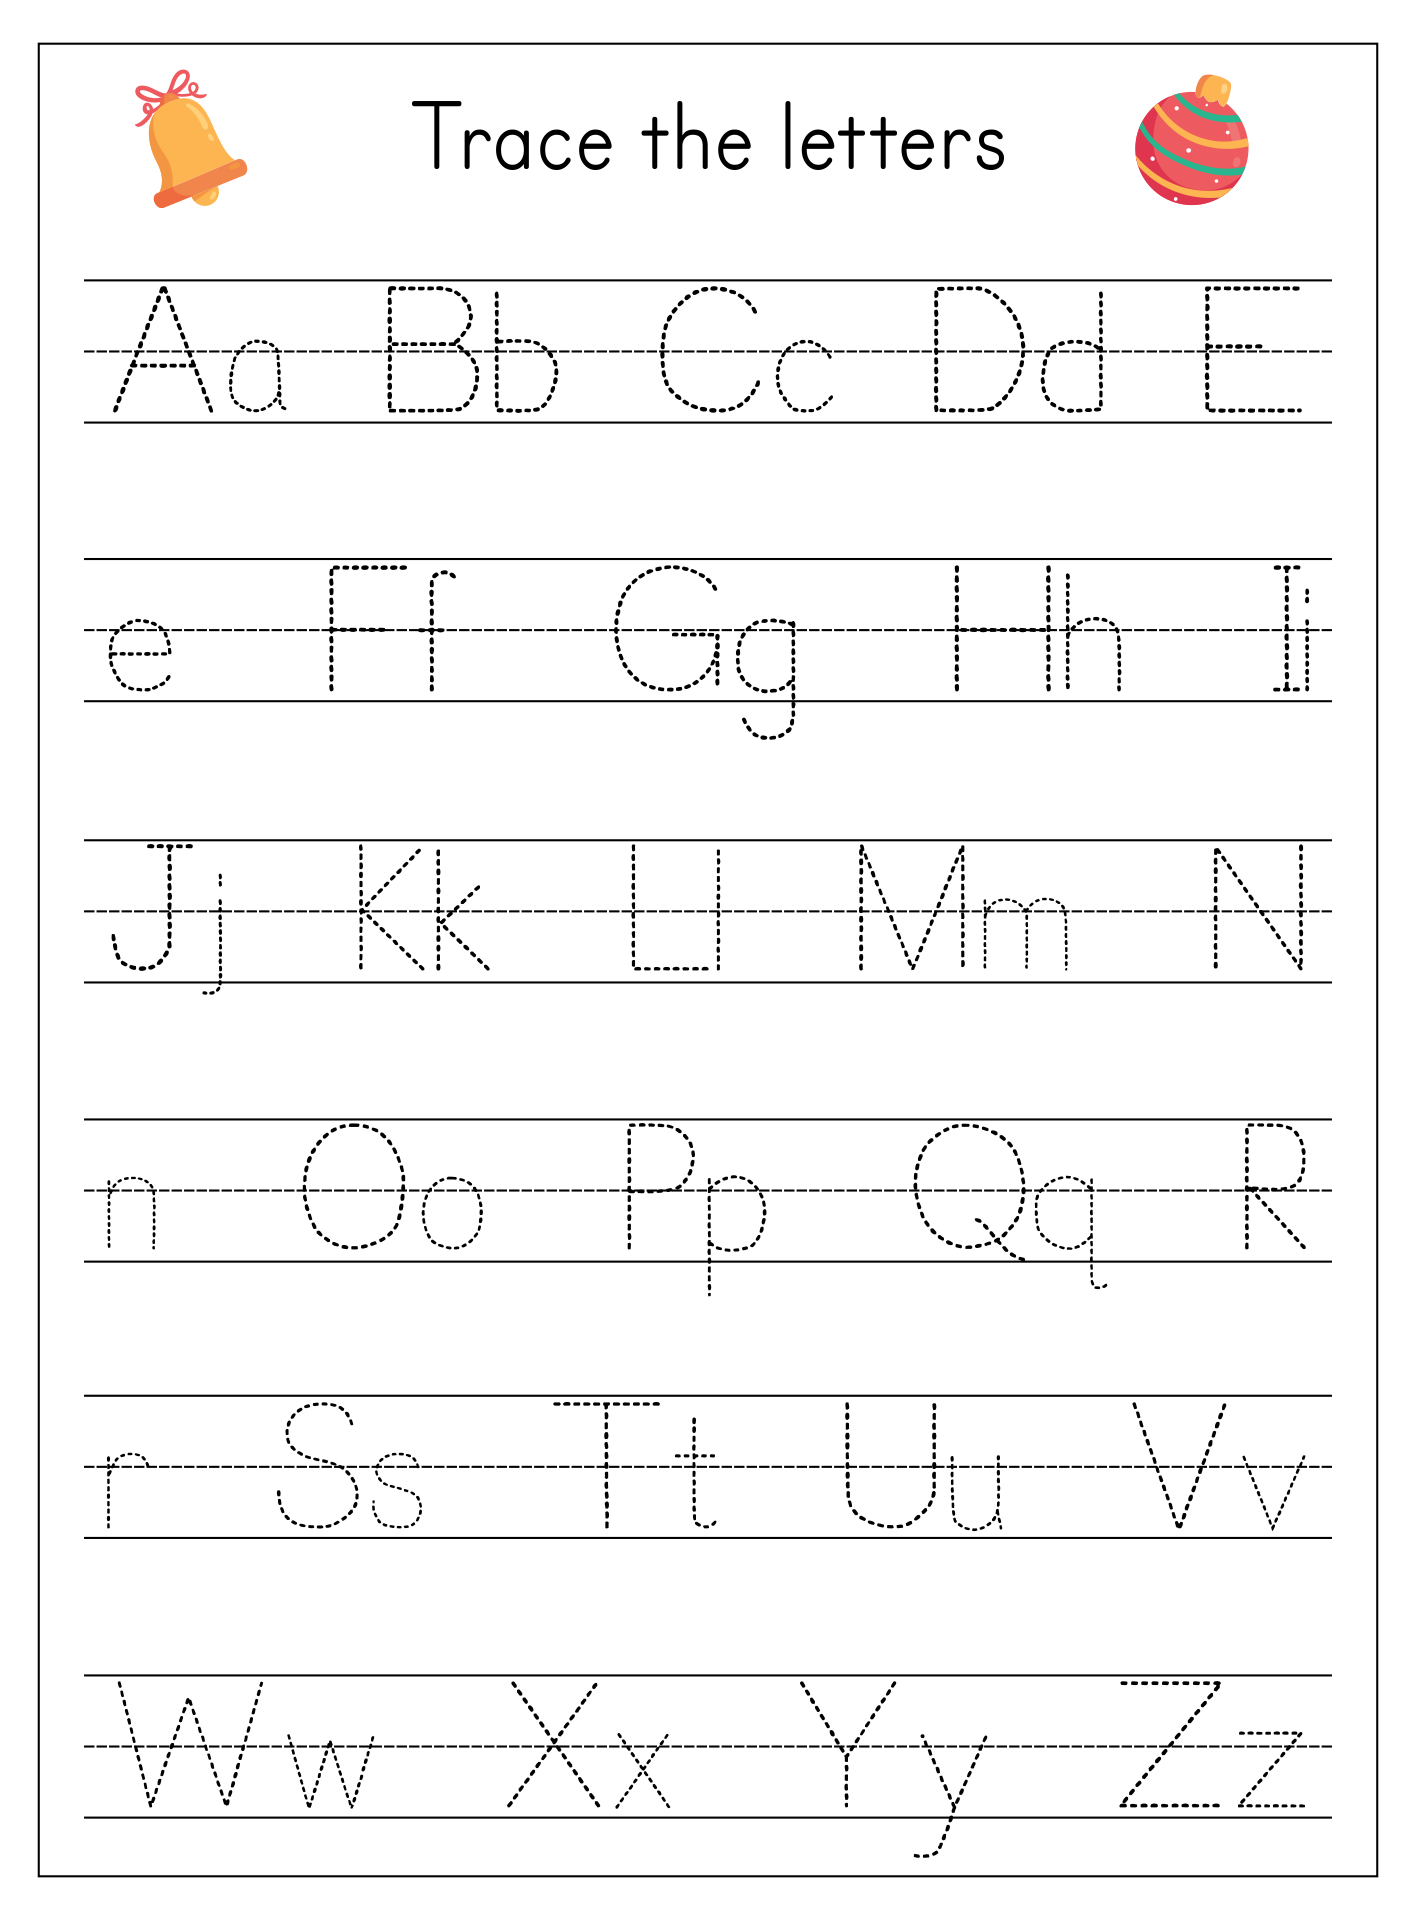 free alphabet tracing worksheets for preschoolers - free printable alphabet worksheets handwriting worksheets for kids | coloring free printable preschool worksheets tracing letters